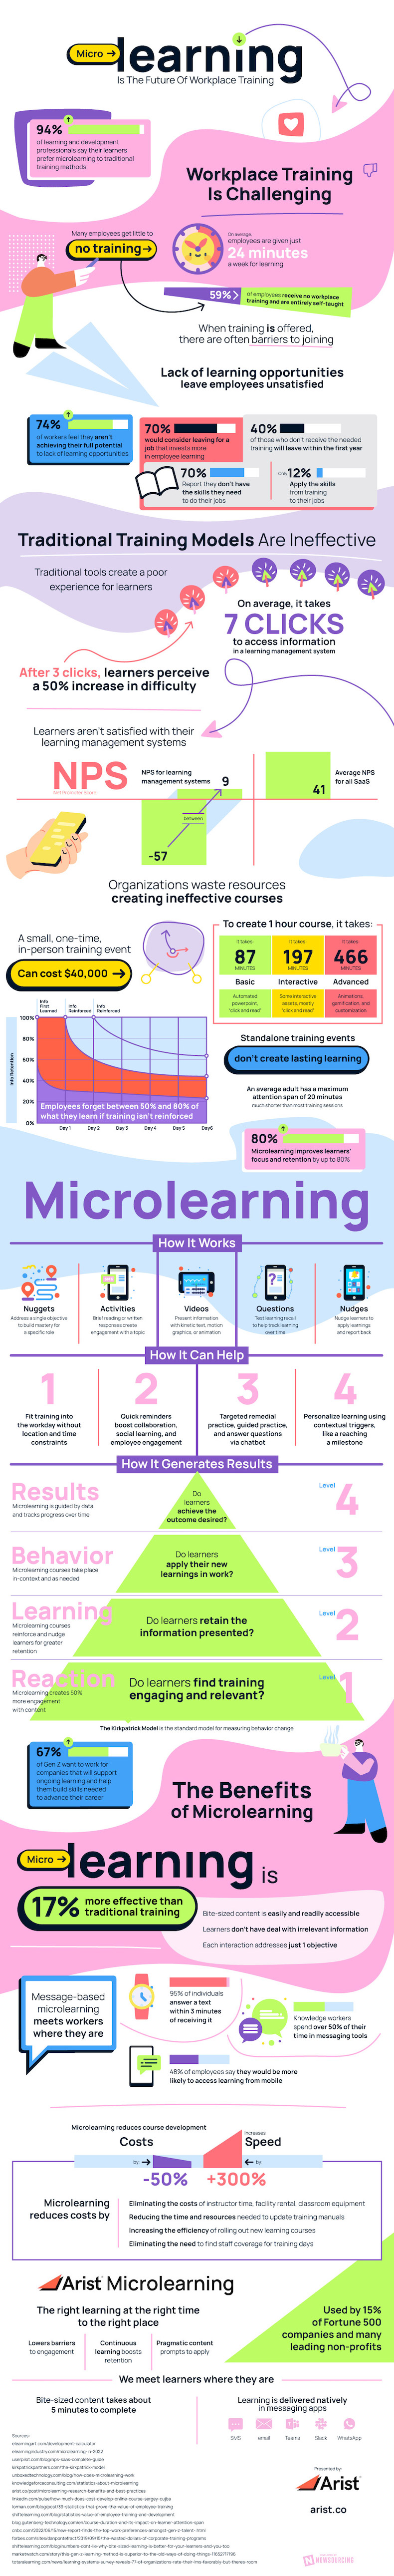 Microlearning is the future of workplace training infographic